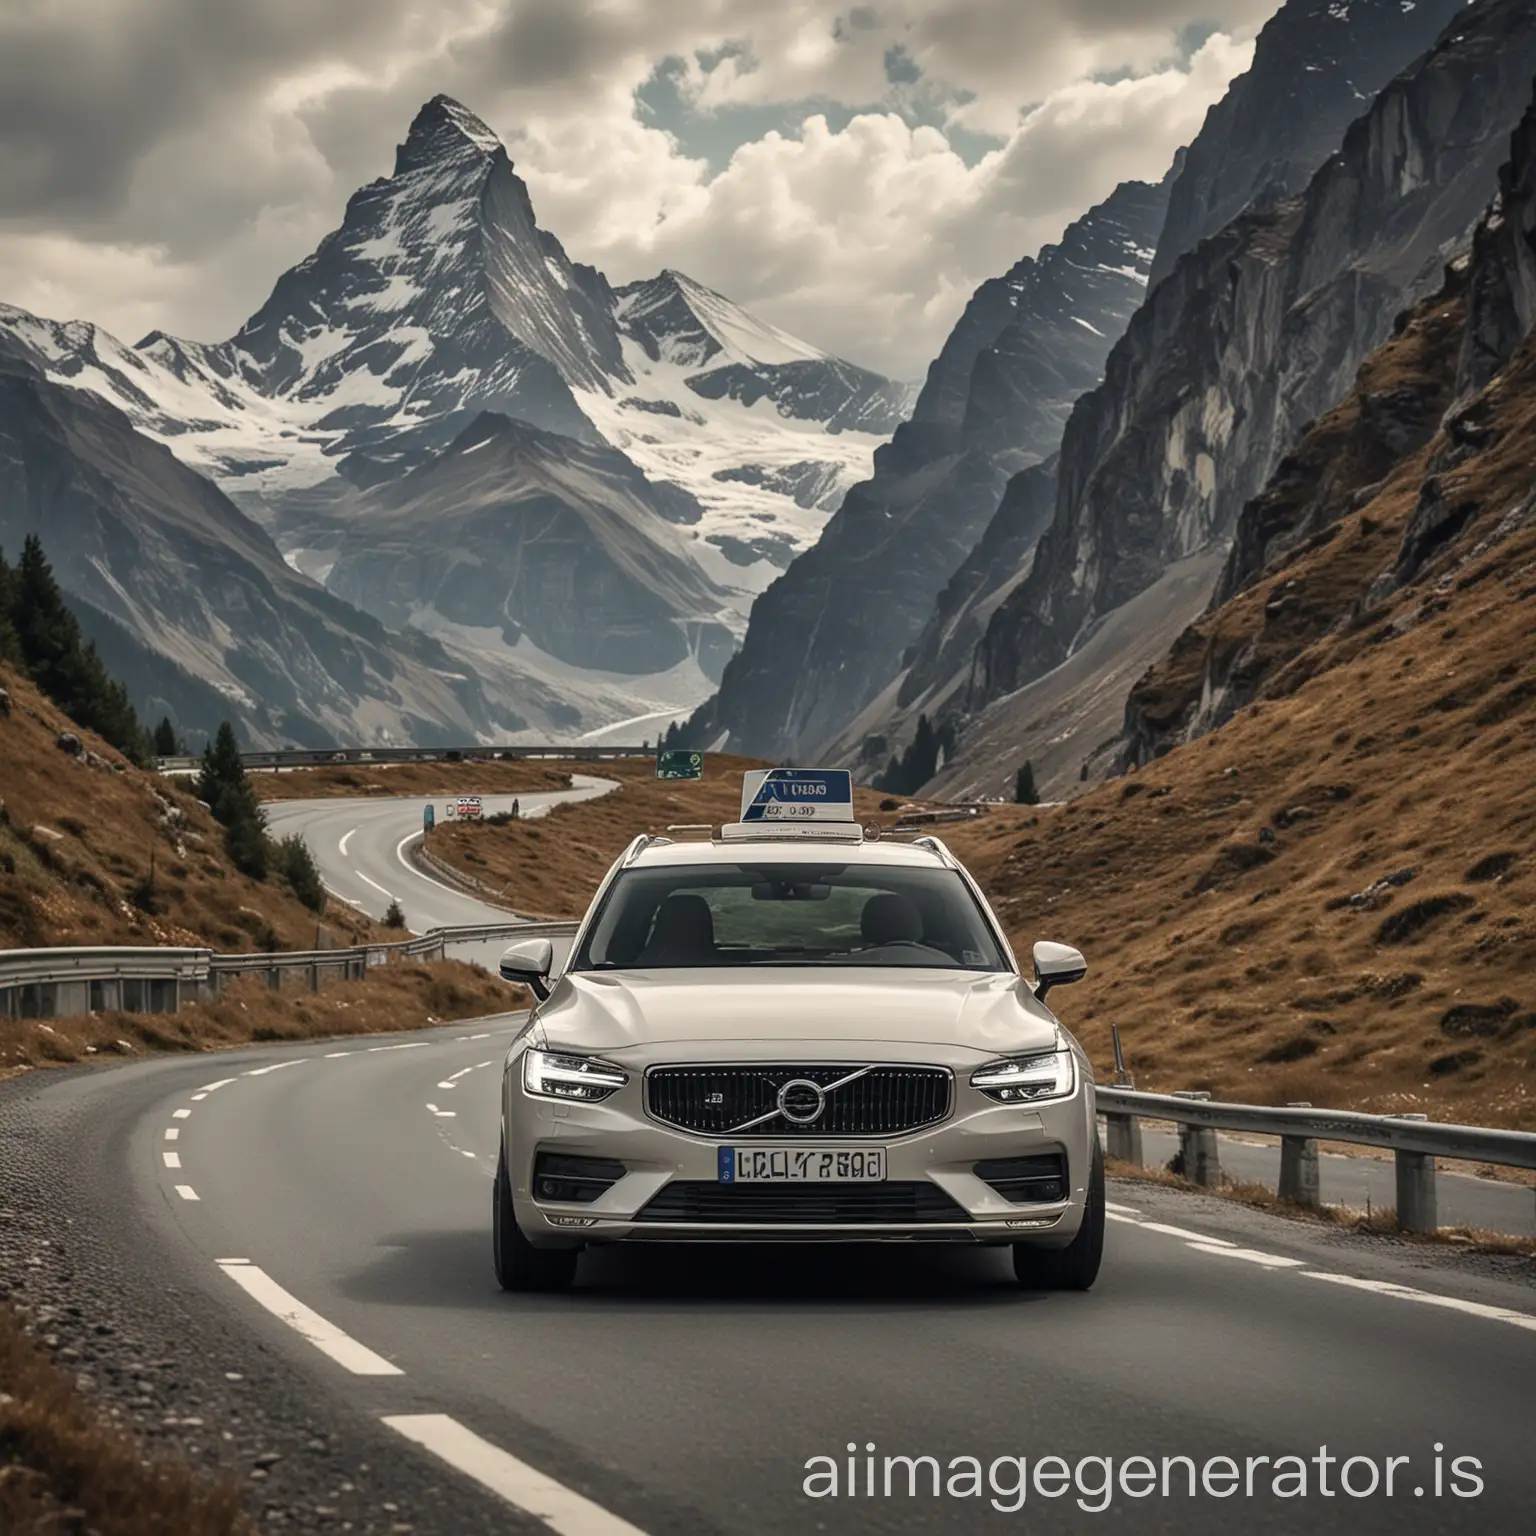 Create an image of a Volvo and a Kia with licence plate 'C-Hans' driving on a mountainous road with many curves, with the Matterhorn and other mountains in the background.